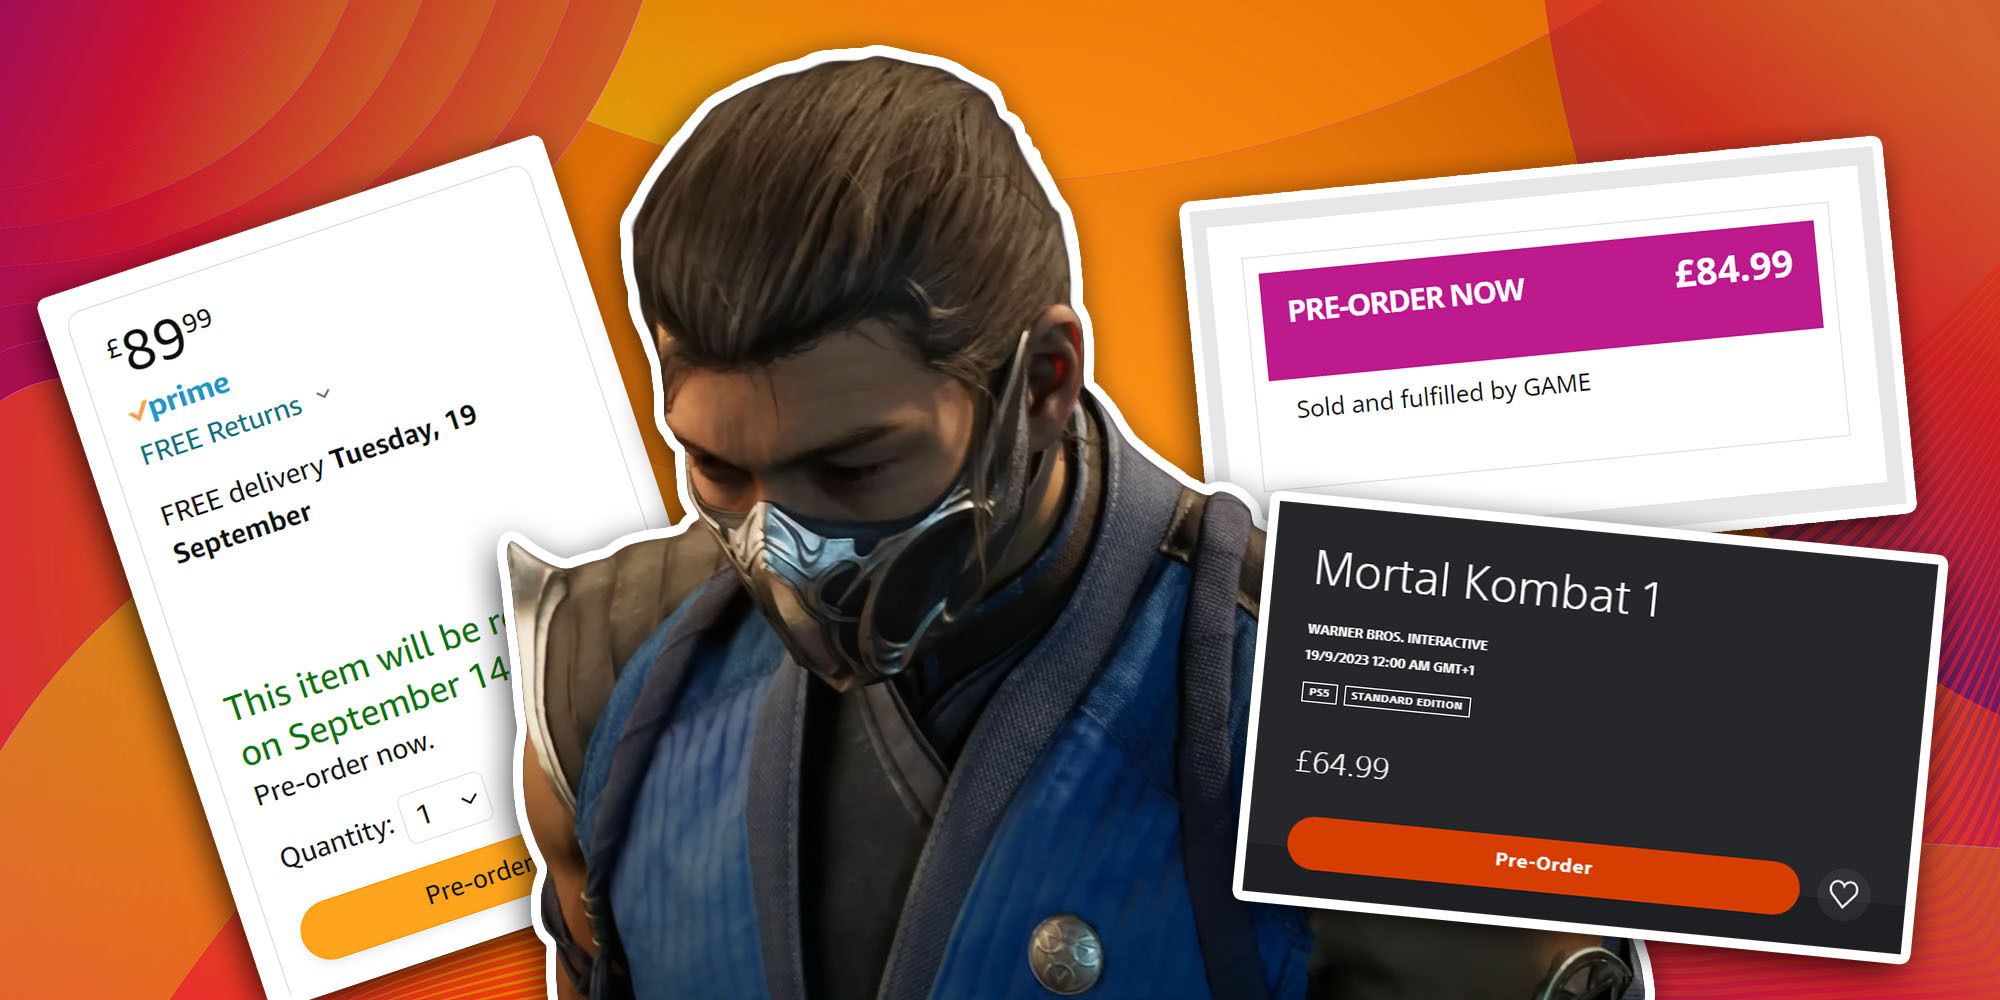 What Platforms Will Mortal Kombat 1 Be Available On? - Answered - Prima  Games